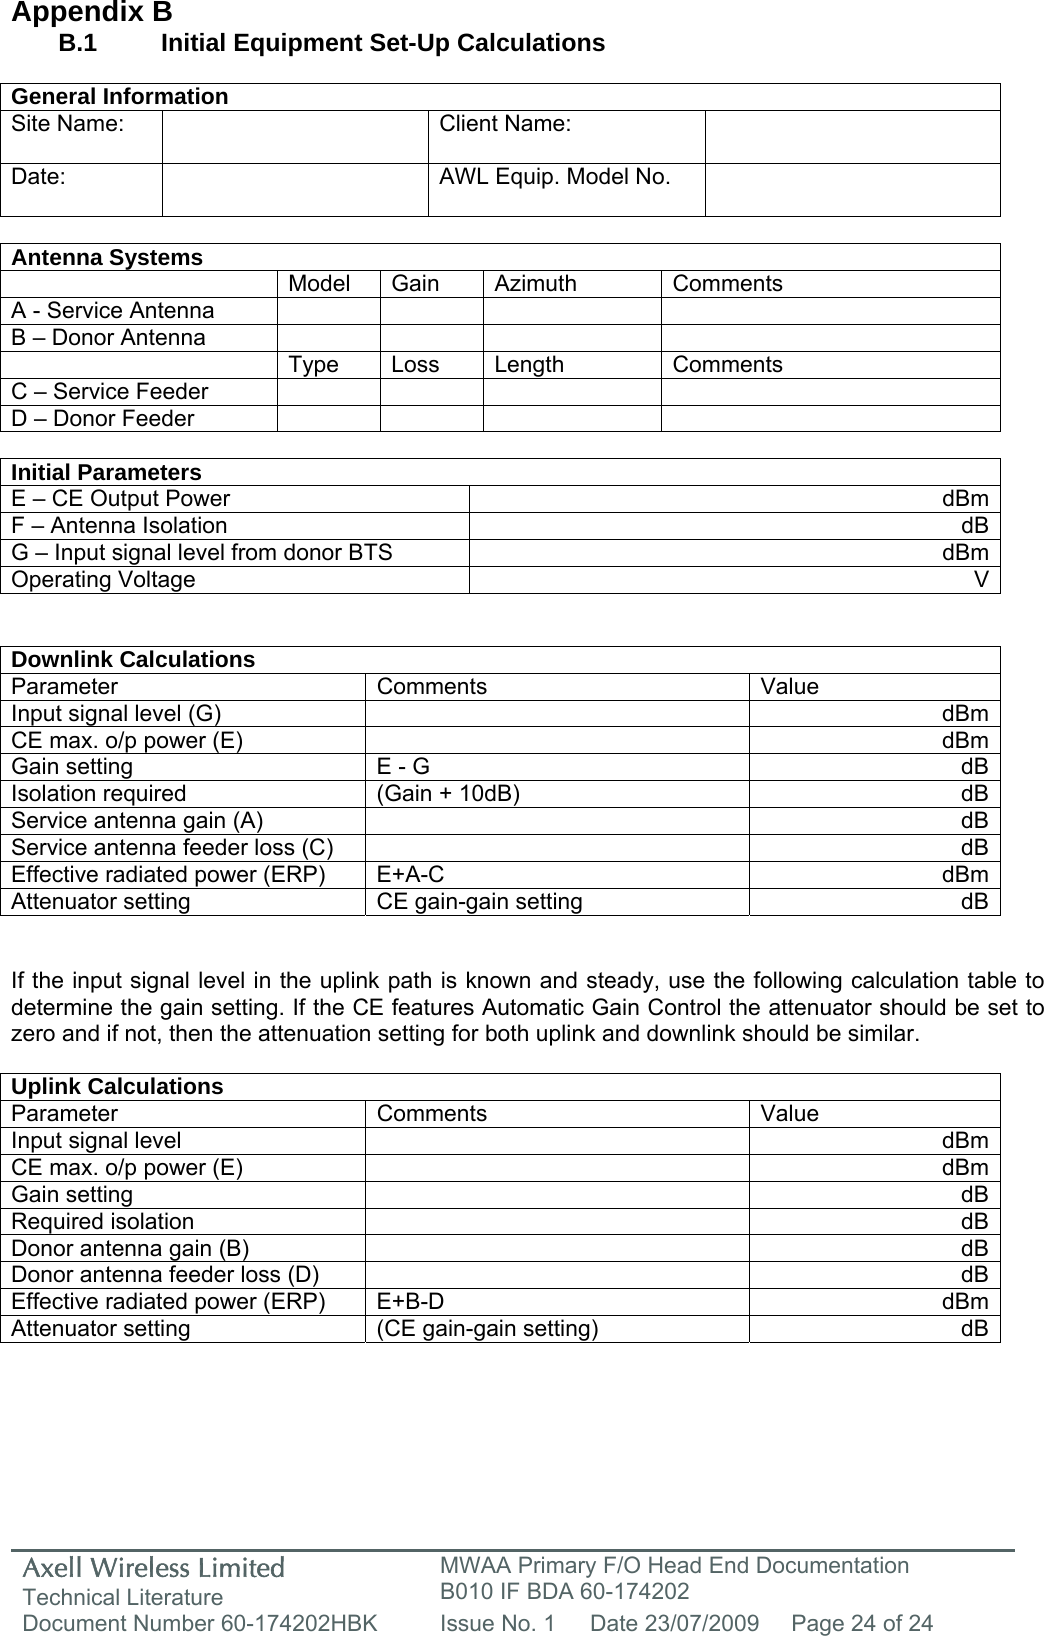 Axell Wireless Limited Technical Literature MWAA Primary F/O Head End Documentation B010 IF BDA 60-174202 Document Number 60-174202HBK  Issue No. 1  Date 23/07/2009  Page 24 of 24   Appendix B B.1   Initial Equipment Set-Up Calculations  General Information Site Name:    Client Name:   Date:   AWL Equip. Model No.    Antenna Systems  Model Gain Azimuth Comments A - Service Antenna         B – Donor Antenna          Type Loss Length Comments C – Service Feeder         D – Donor Feeder          Initial Parameters E – CE Output Power  dBmF – Antenna Isolation  dBG – Input signal level from donor BTS  dBmOperating Voltage  V  Downlink Calculations Parameter Comments  Value Input signal level (G)    dBmCE max. o/p power (E)    dBmGain setting  E - G  dBIsolation required  (Gain + 10dB)  dBService antenna gain (A)    dBService antenna feeder loss (C)    dBEffective radiated power (ERP)  E+A-C  dBmAttenuator setting  CE gain-gain setting  dB  If the input signal level in the uplink path is known and steady, use the following calculation table to determine the gain setting. If the CE features Automatic Gain Control the attenuator should be set to zero and if not, then the attenuation setting for both uplink and downlink should be similar.  Uplink Calculations Parameter Comments  Value Input signal level    dBmCE max. o/p power (E)    dBmGain setting    dBRequired isolation    dBDonor antenna gain (B)    dBDonor antenna feeder loss (D)    dBEffective radiated power (ERP)  E+B-D  dBmAttenuator setting  (CE gain-gain setting)  dB     